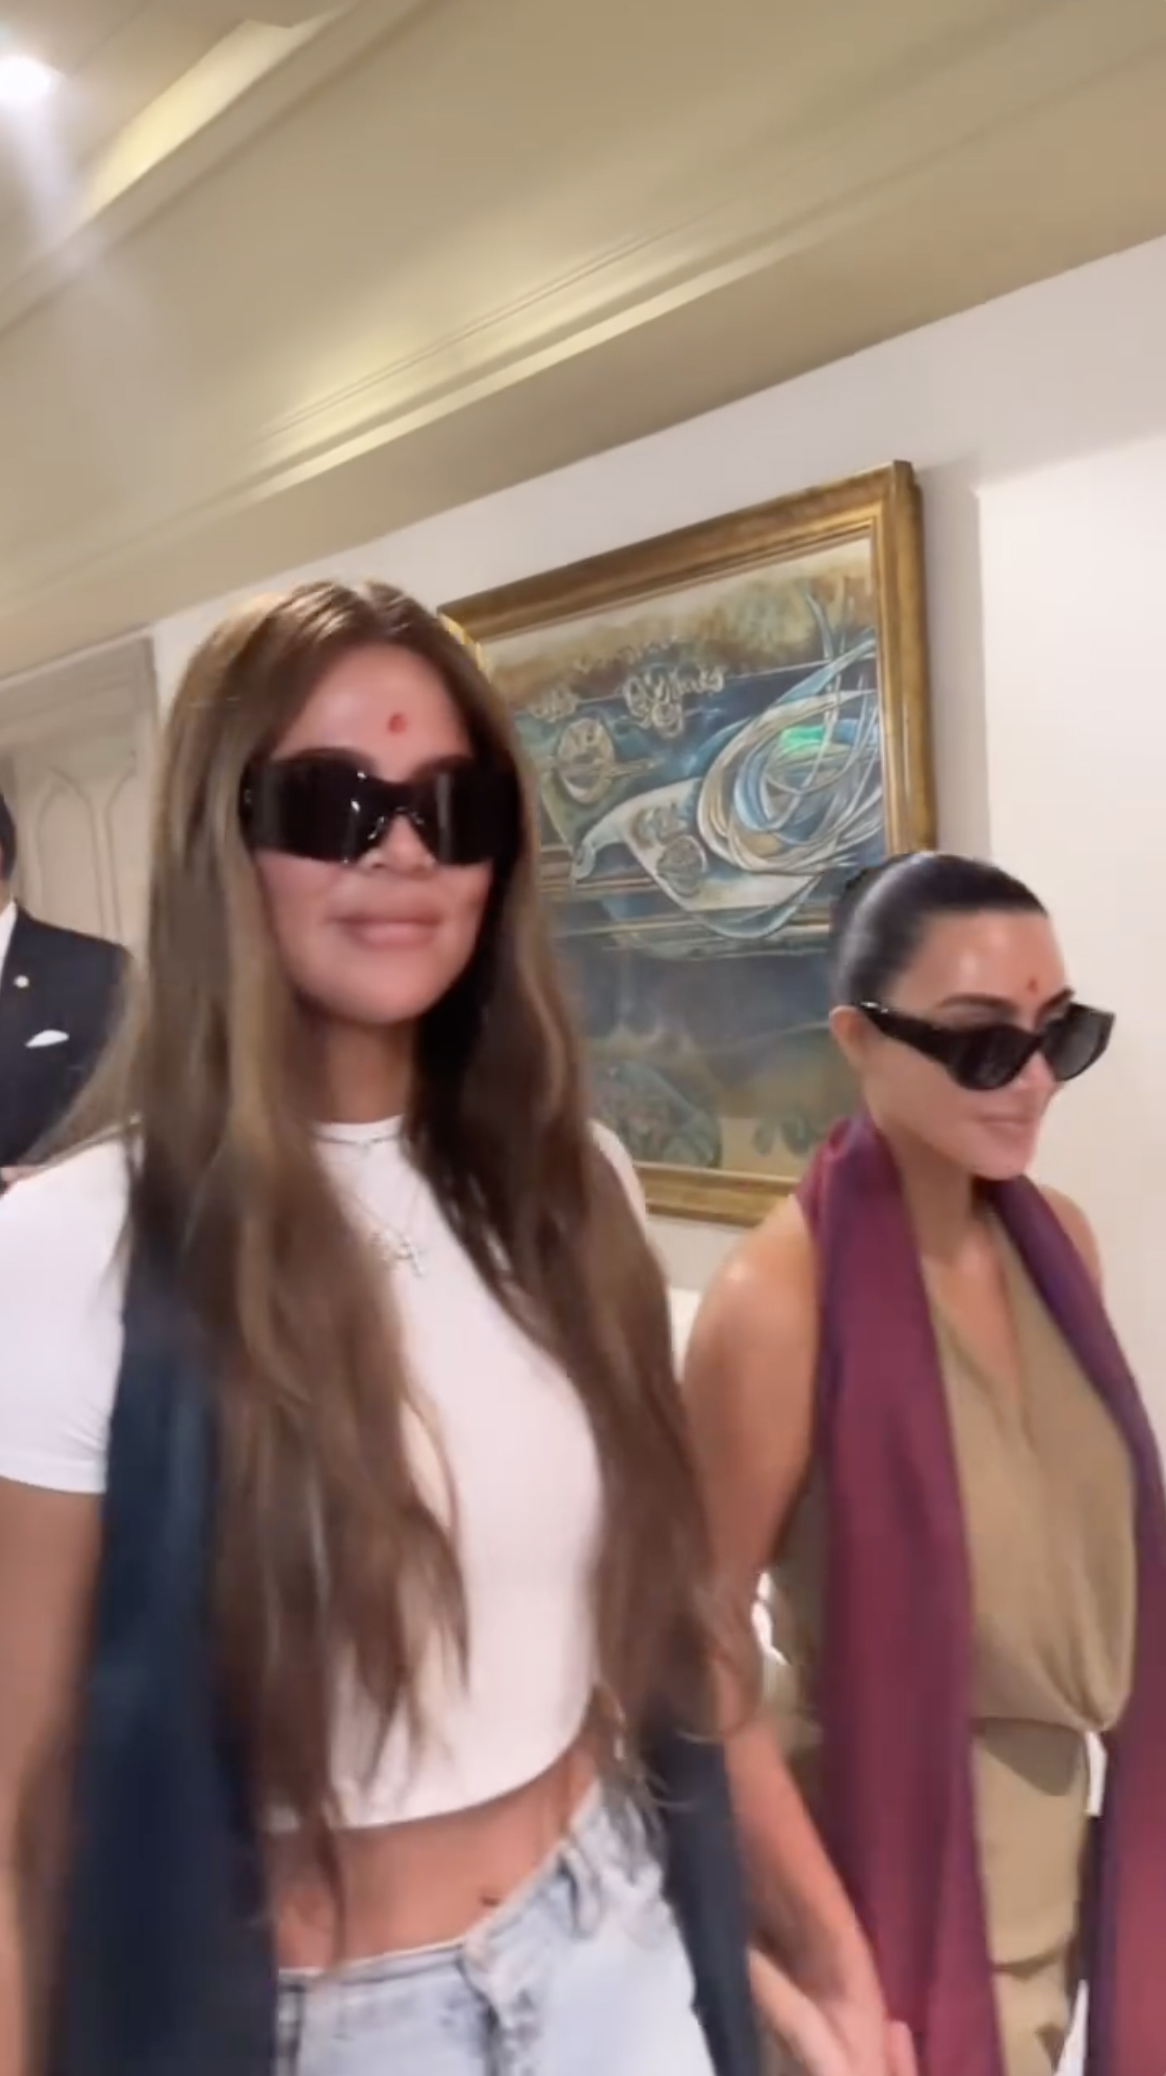 Upon arrival, Kim Kardashian received backlash for wearing sunglasses when she received a traditional welcoming